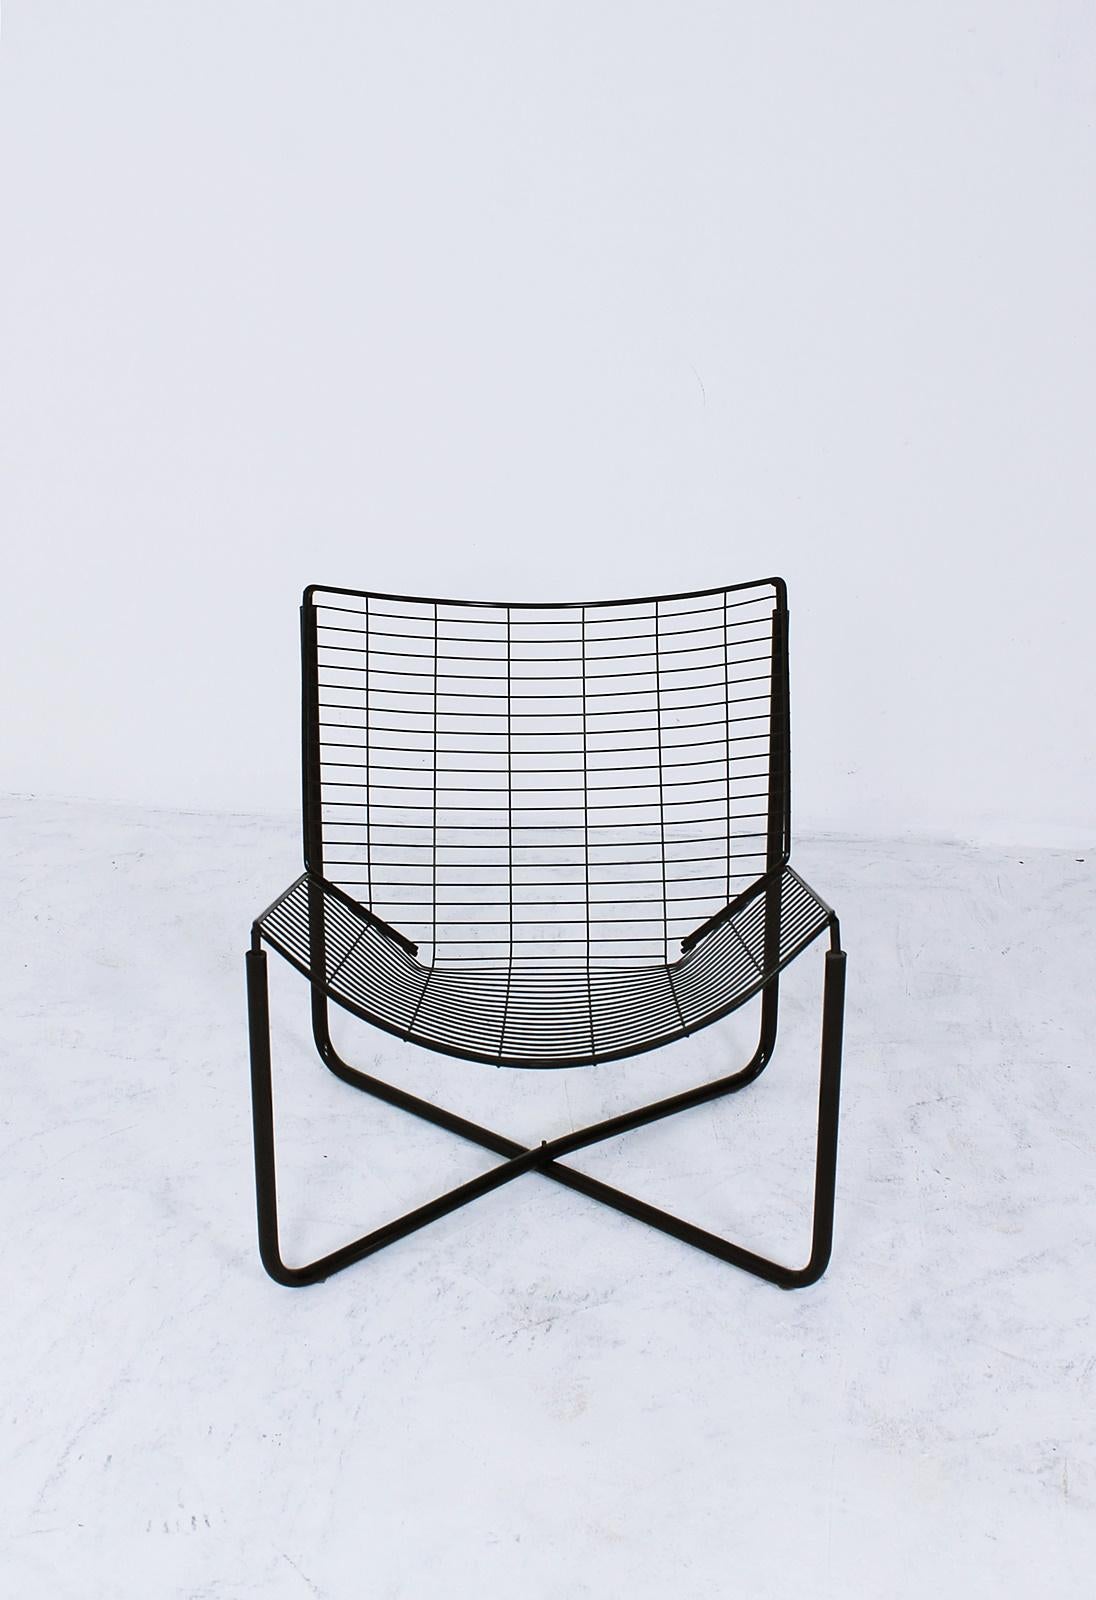 This lounge chair or easy chair was designed by Niels Gammelgaard for Ikea, and produced in 1983. 
The frame is made of black lacquered metal. 
Vintage Ikea is now becoming very collectible and these chairs have a fantastic look.

 Price is per